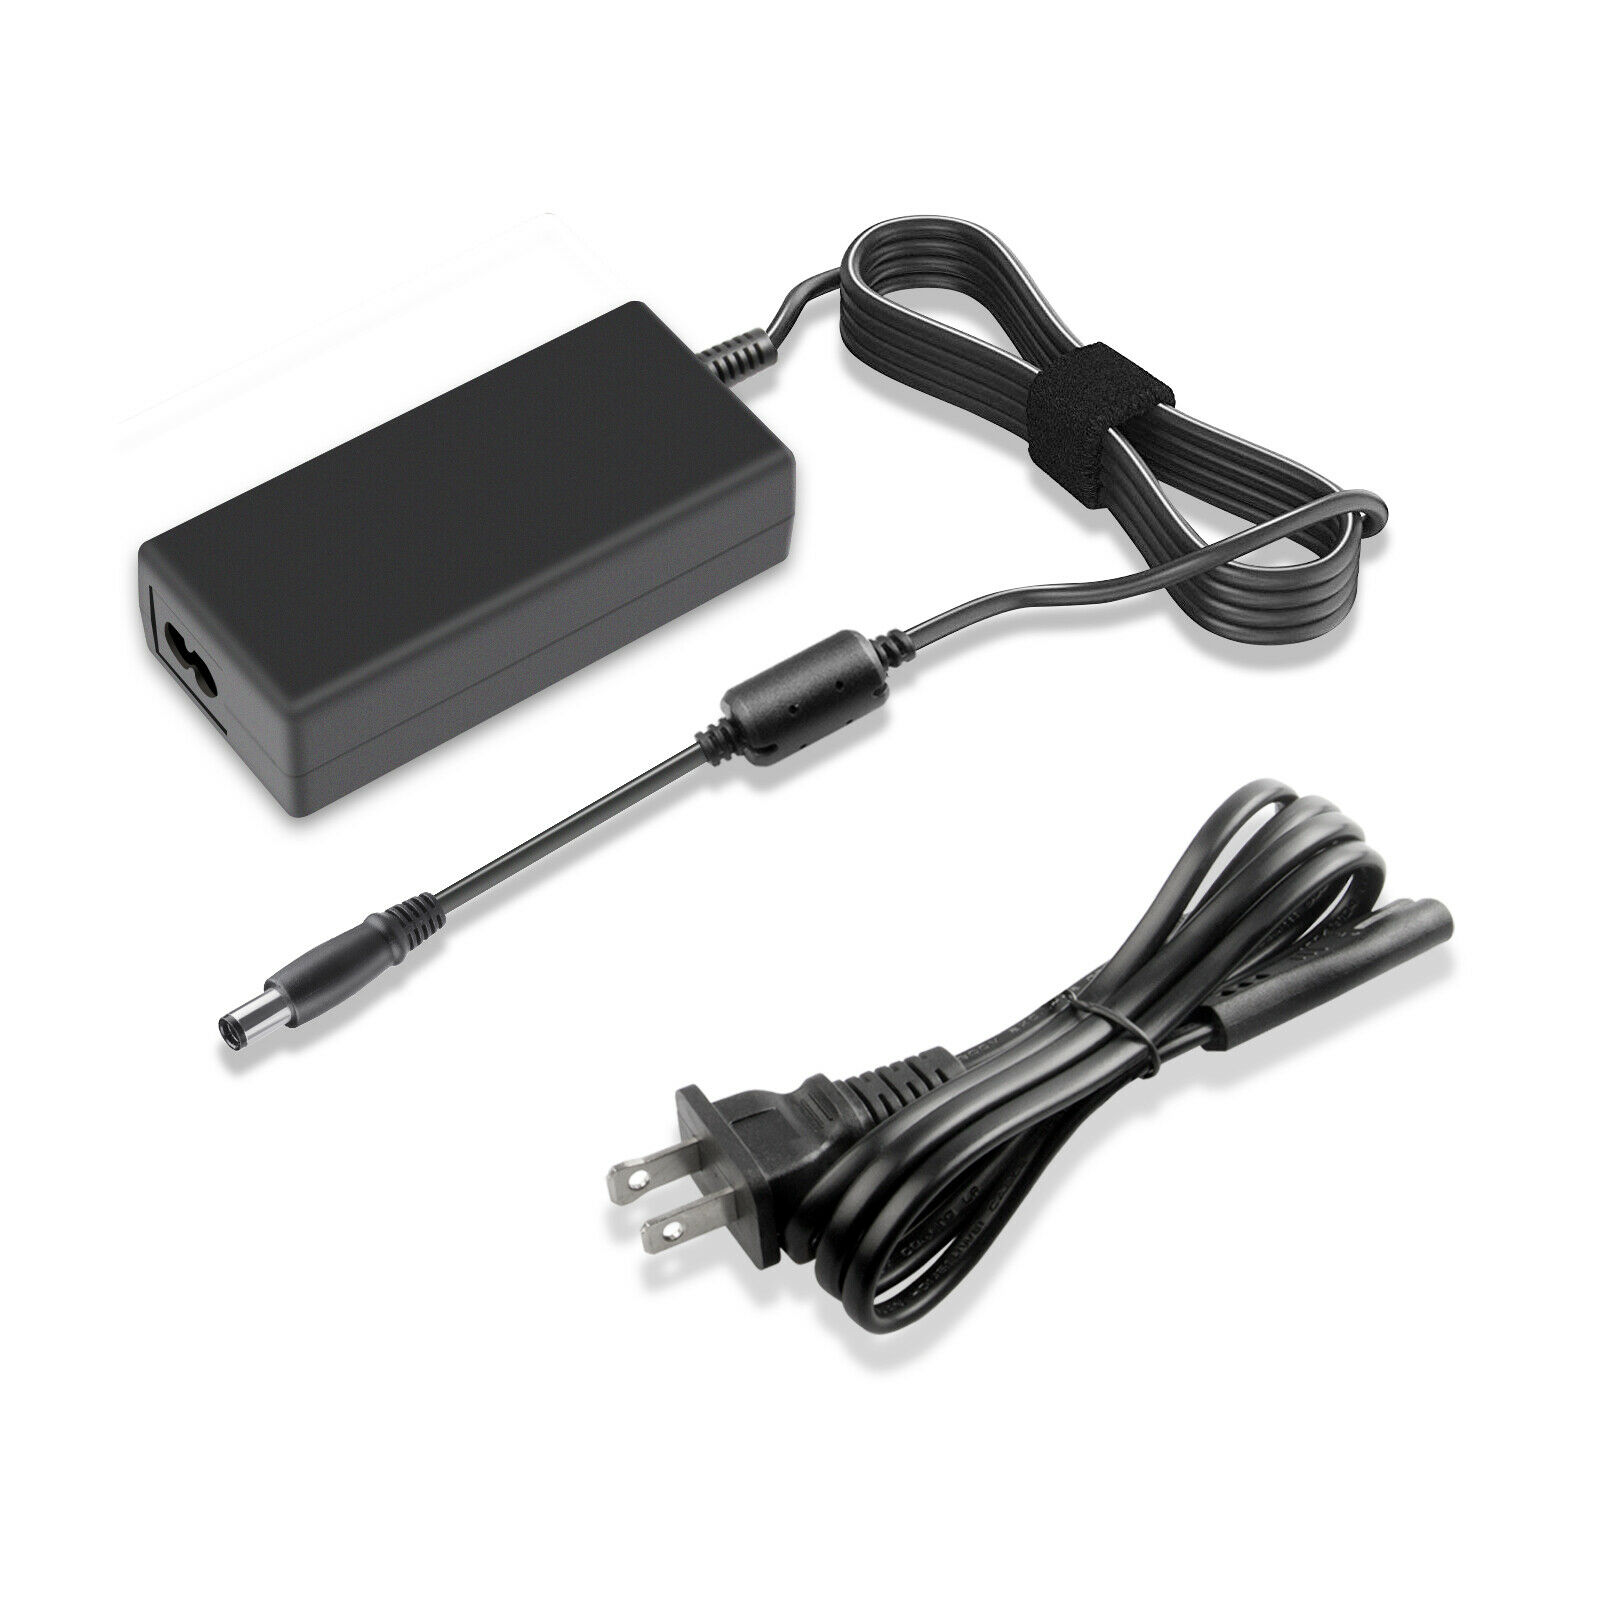 HP Pavilion dv5-2000 Replacement Power Adapter Charger